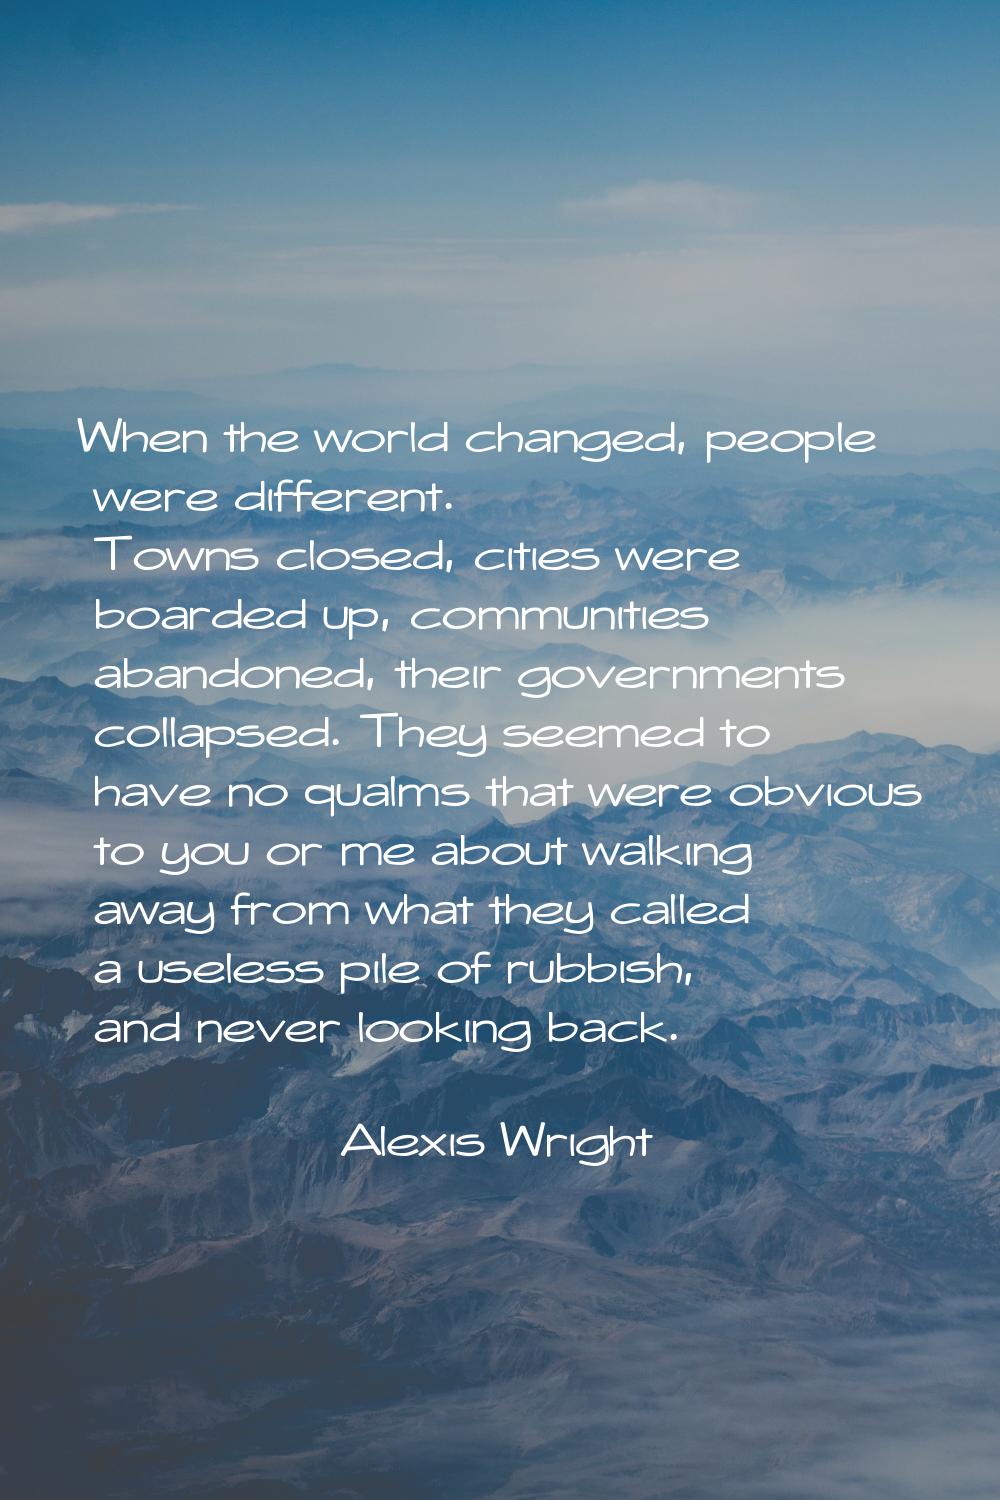 When the world changed, people were different. Towns closed, cities were boarded up, communities ab